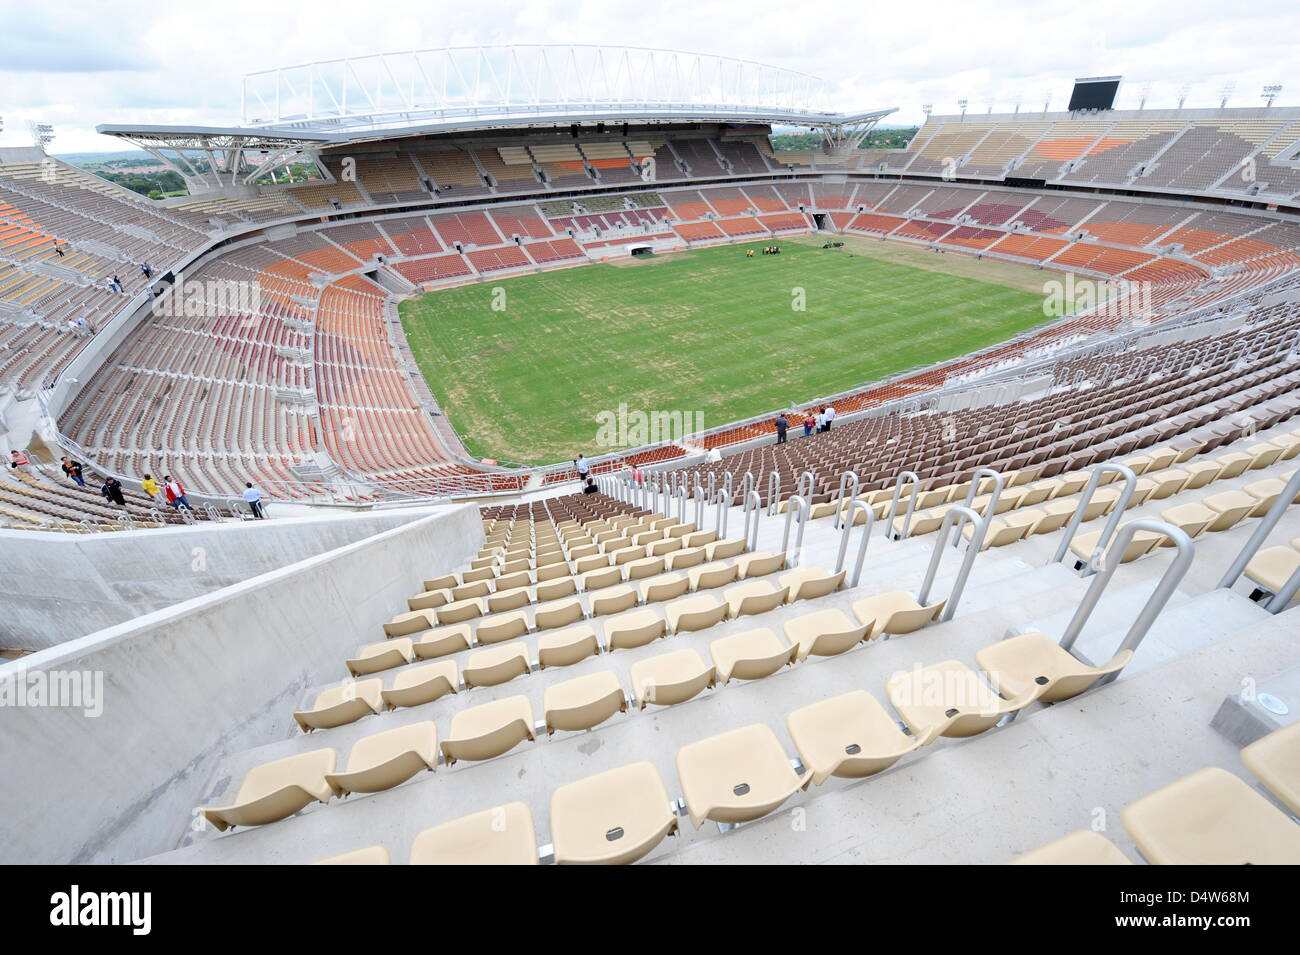 The Peter Mokaba Stadium pictured in Polokwane, South Africa, 11 December 2009. The stadium can host 45.000 spectators and is one of the stadiums for the FIFA World Cup 2010 in South Africa. Photo: Bernd Weissbrod Stock Photo